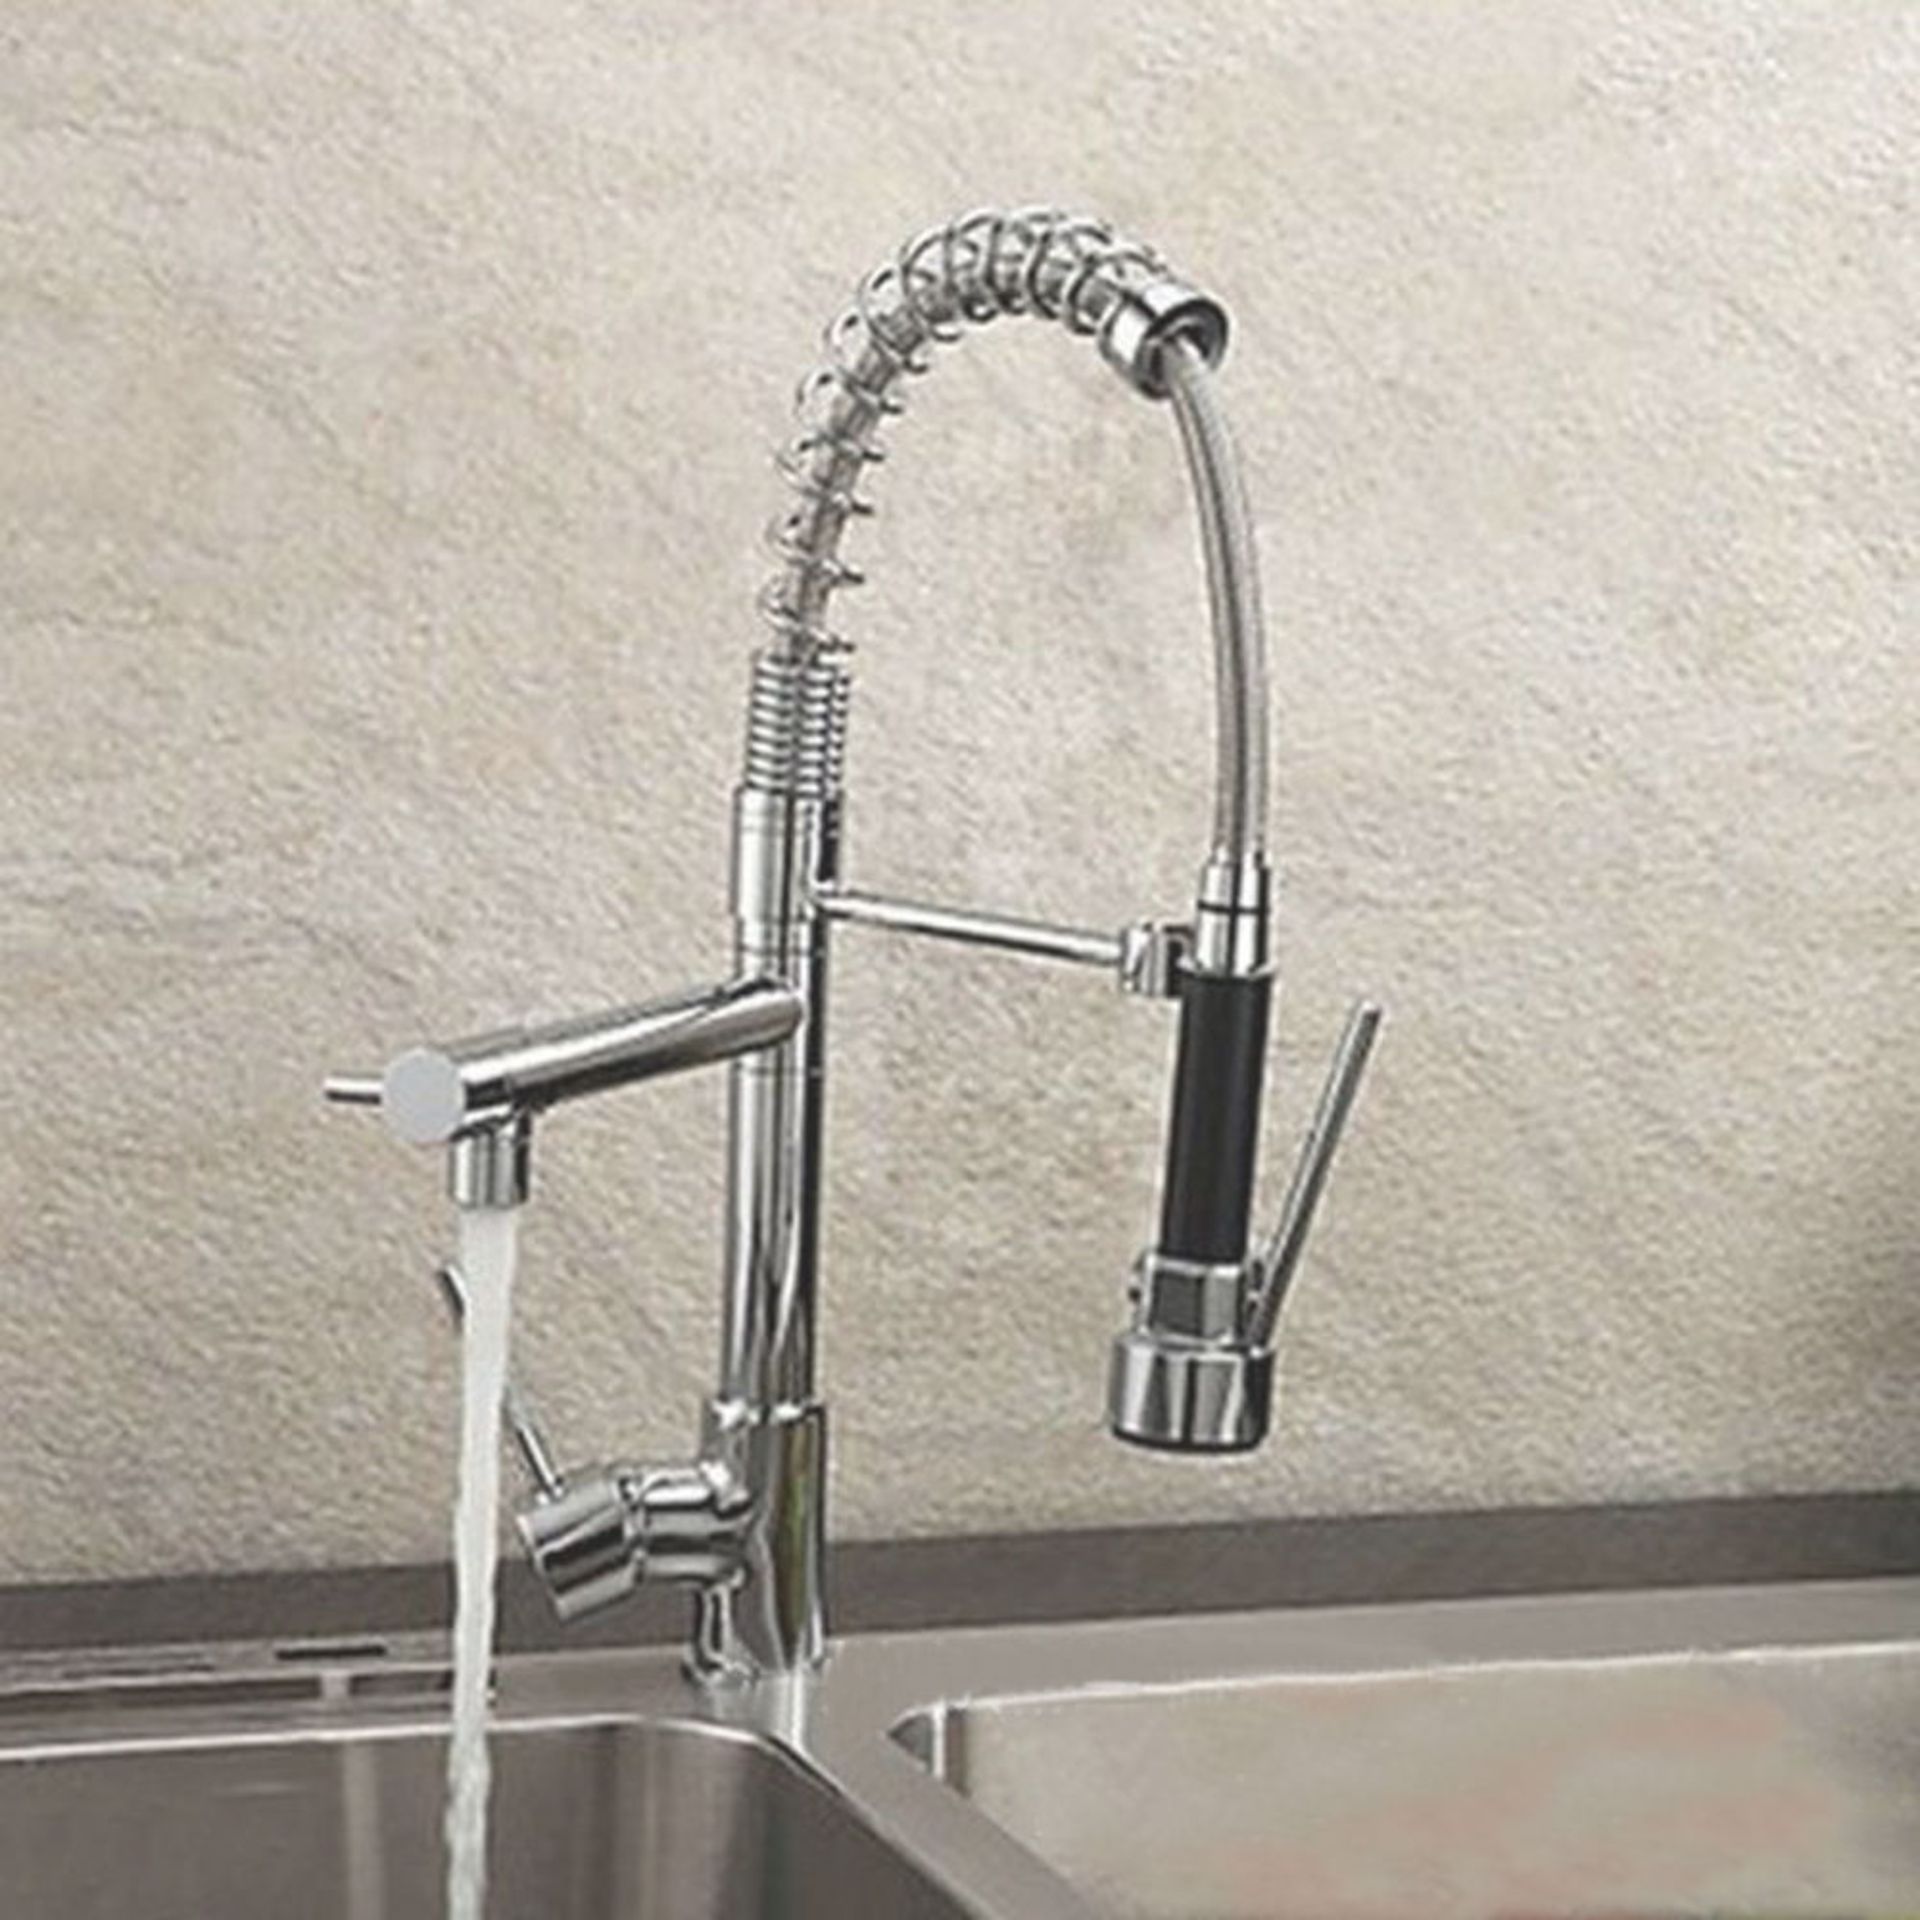 (A33) Bentley Modern Monobloc Chrome Brass Pull Out Spray Mixer Tap. RRP £349.99. This tap is from